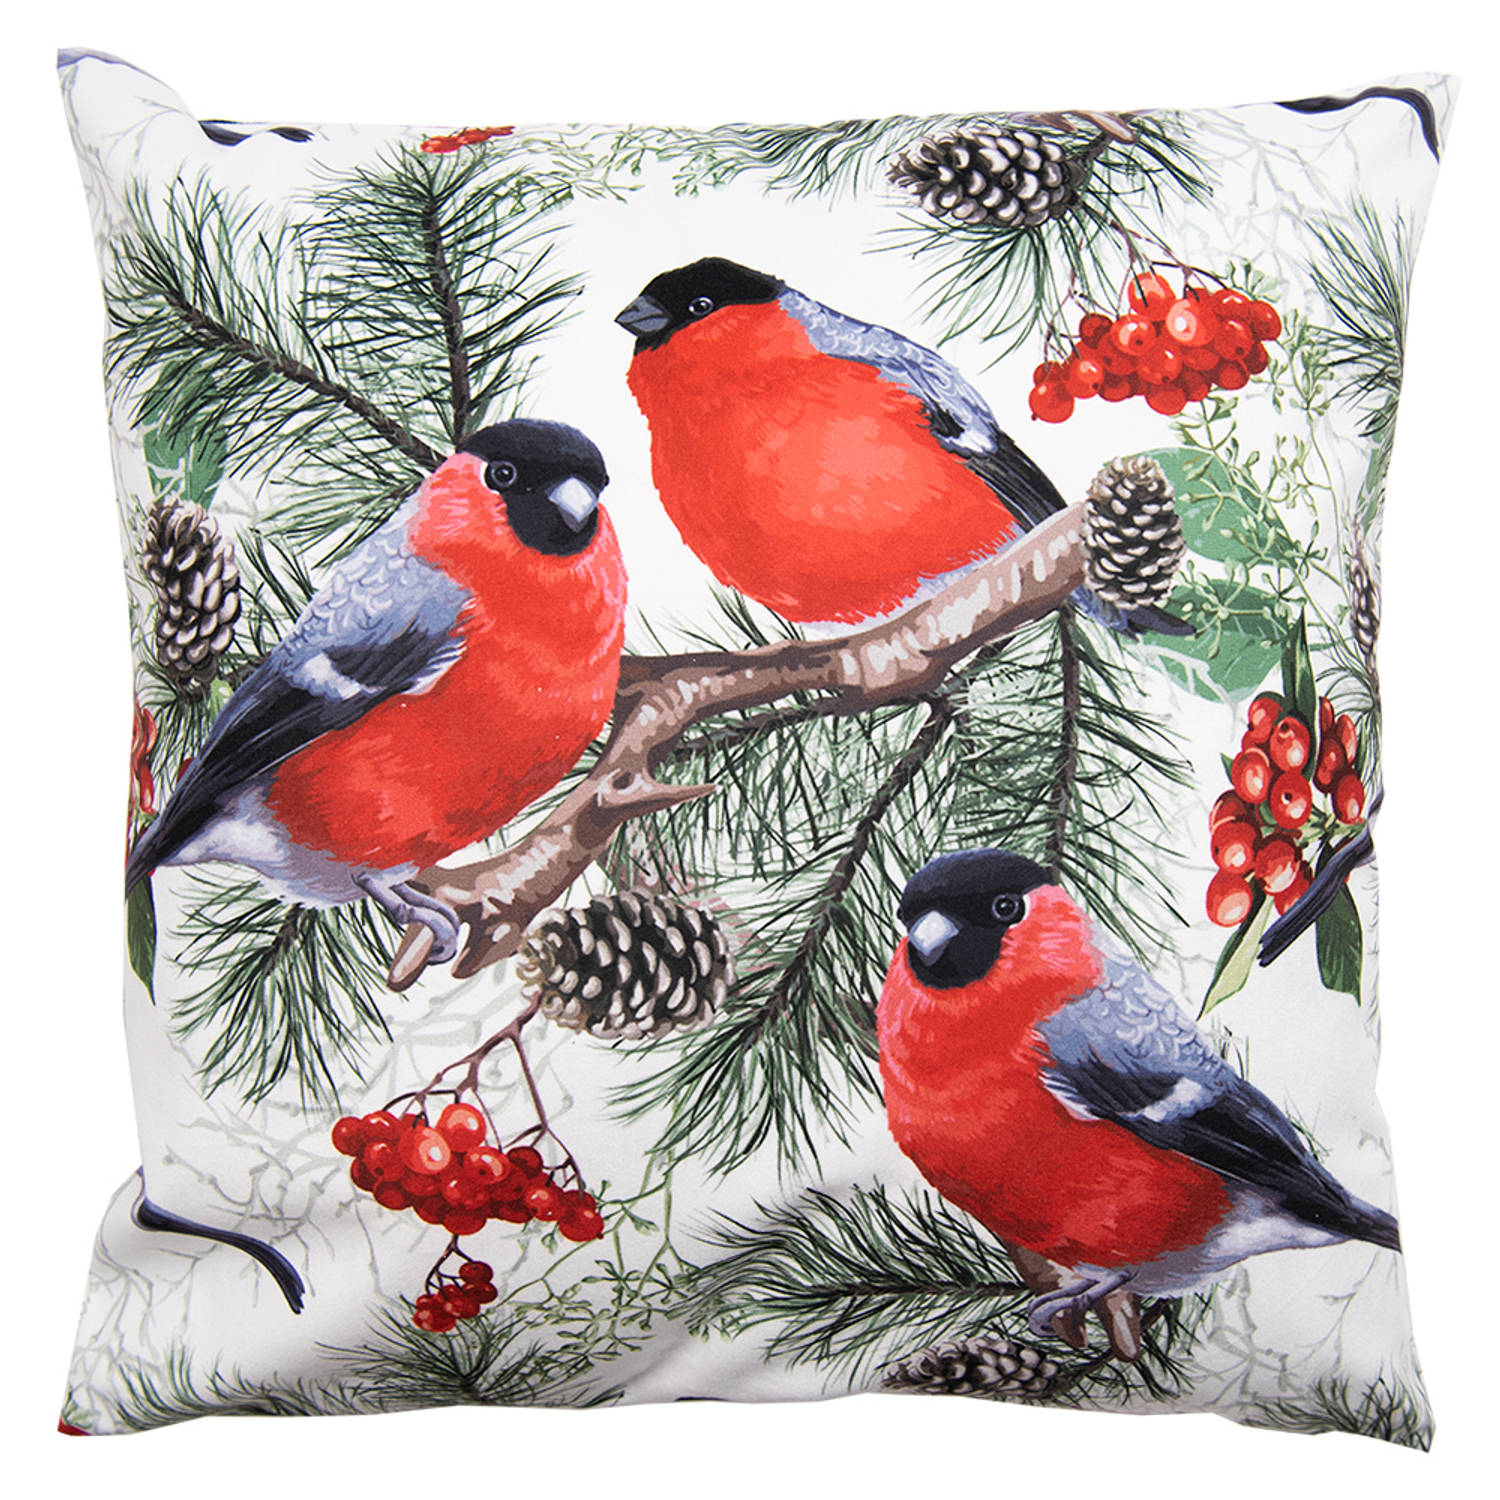 Clayre & Eef Kussenhoes 45x45 Cm Wit Rood Polyester Vogels Sierkussenhoes Kussen Hoes Wit Sierkussen